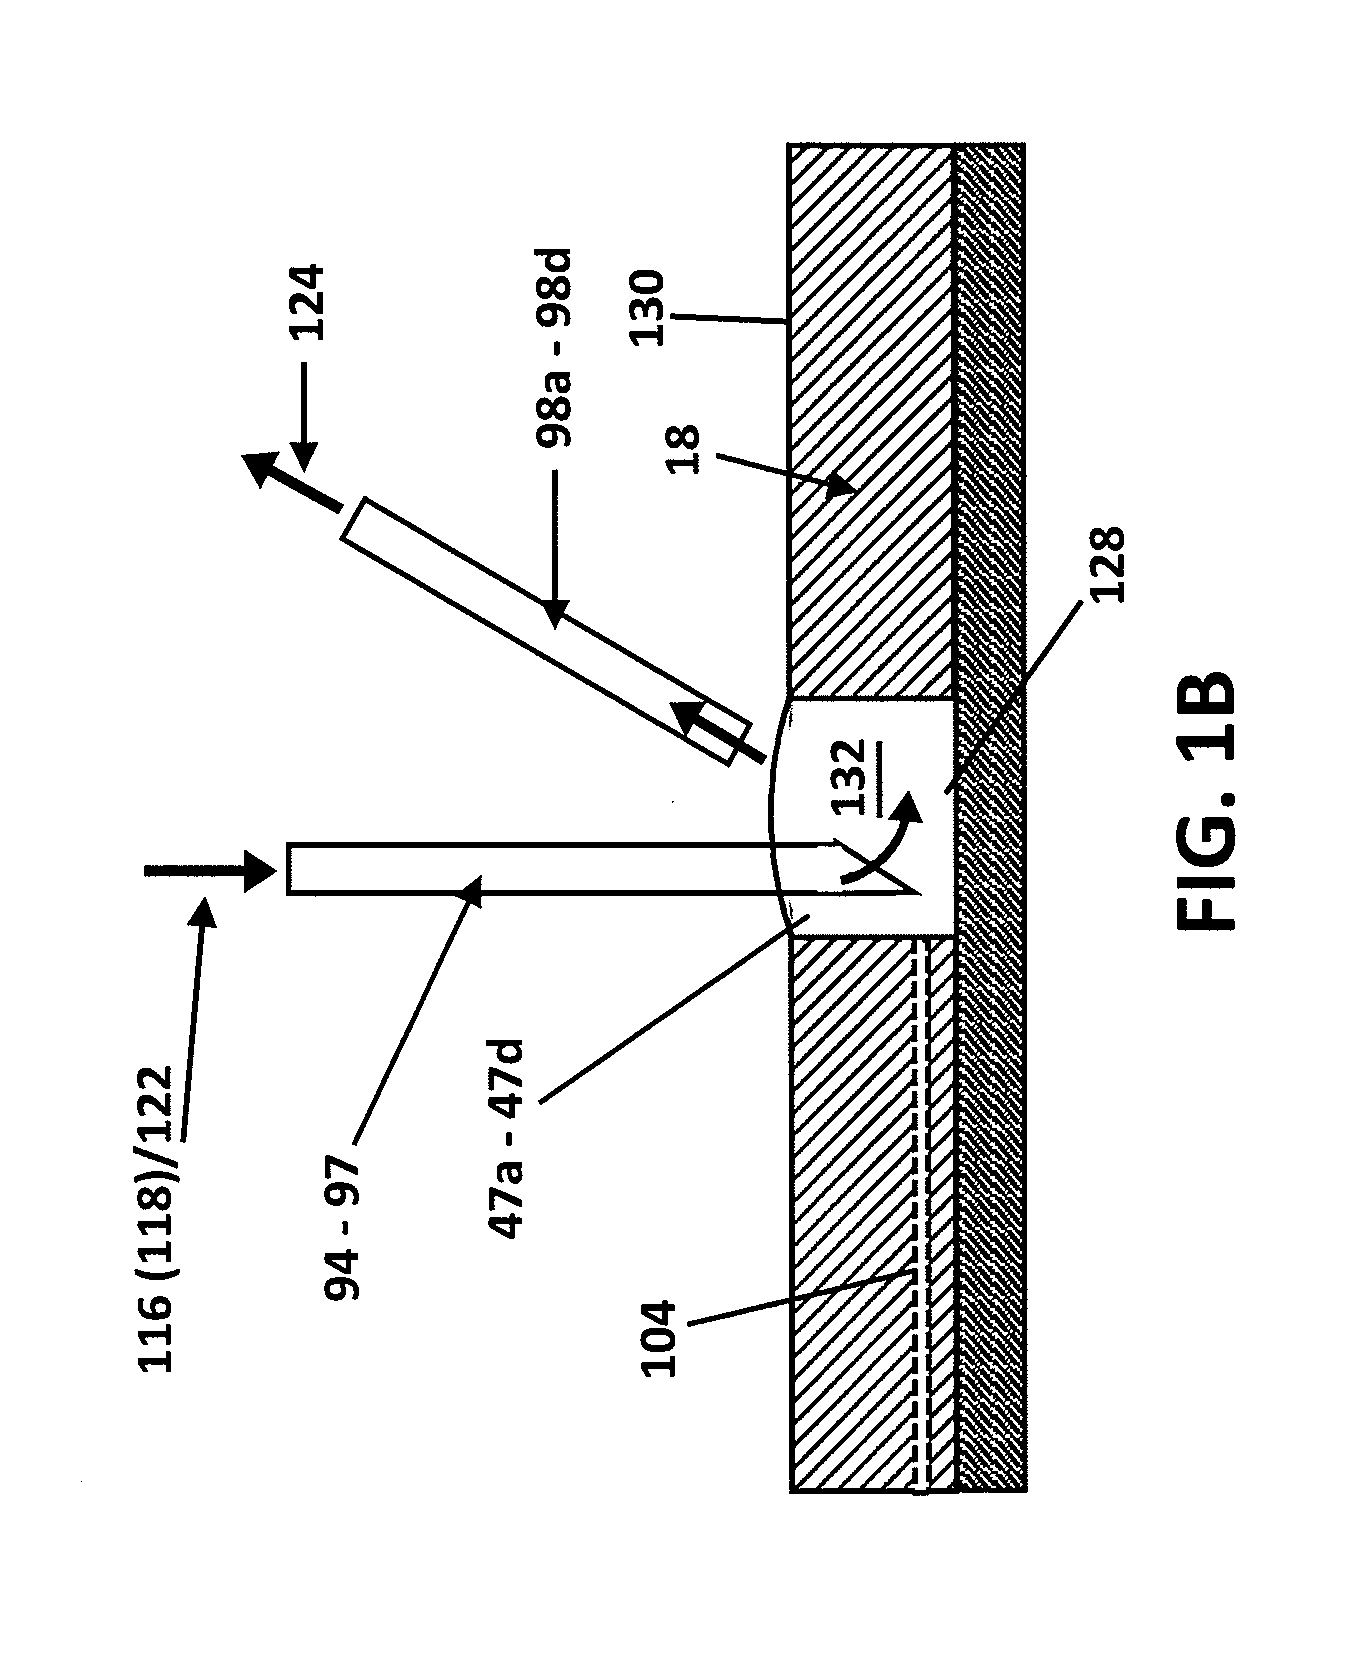 Fluidic and electrical interface for microfluidic chips